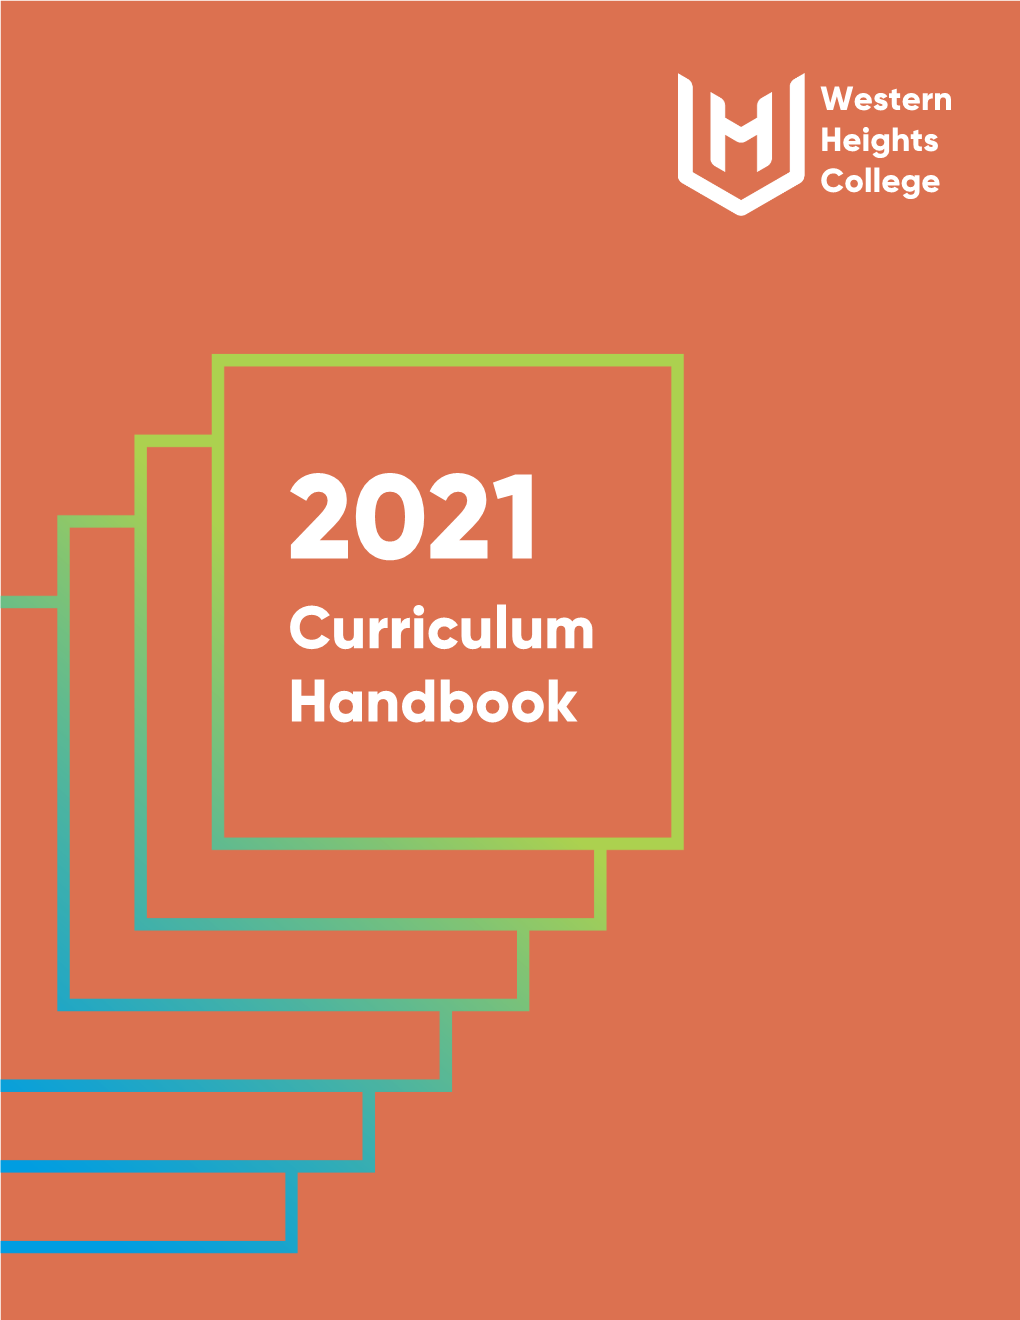 Curriculum Handbook So That You Are Fully Aware of What Is on Offer